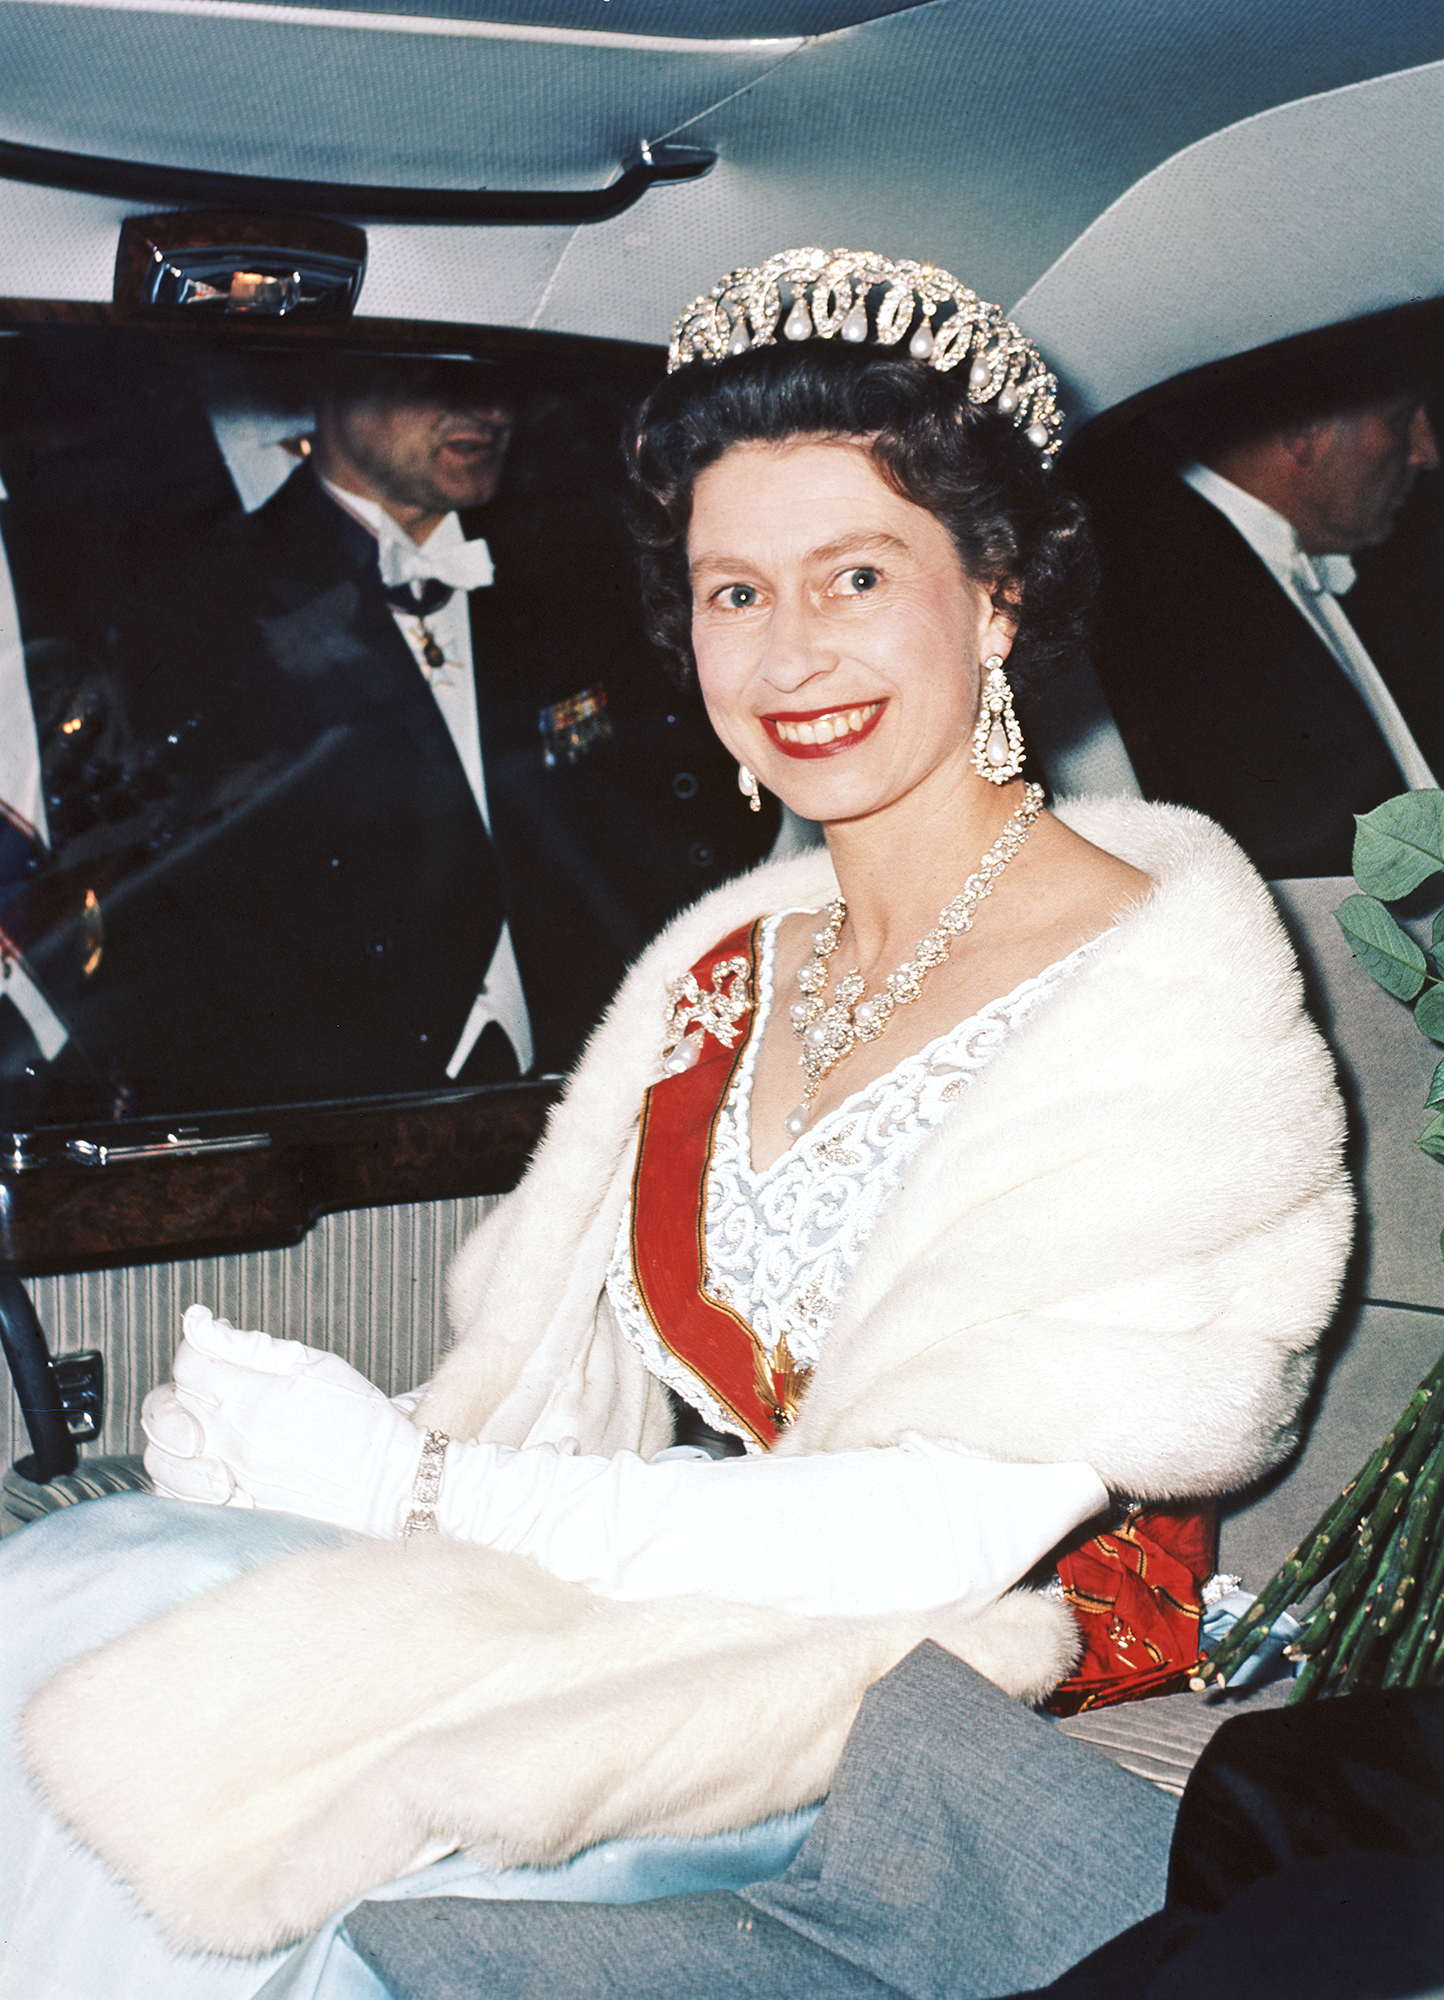 A look at Queen Elizabeth II's style through the decades